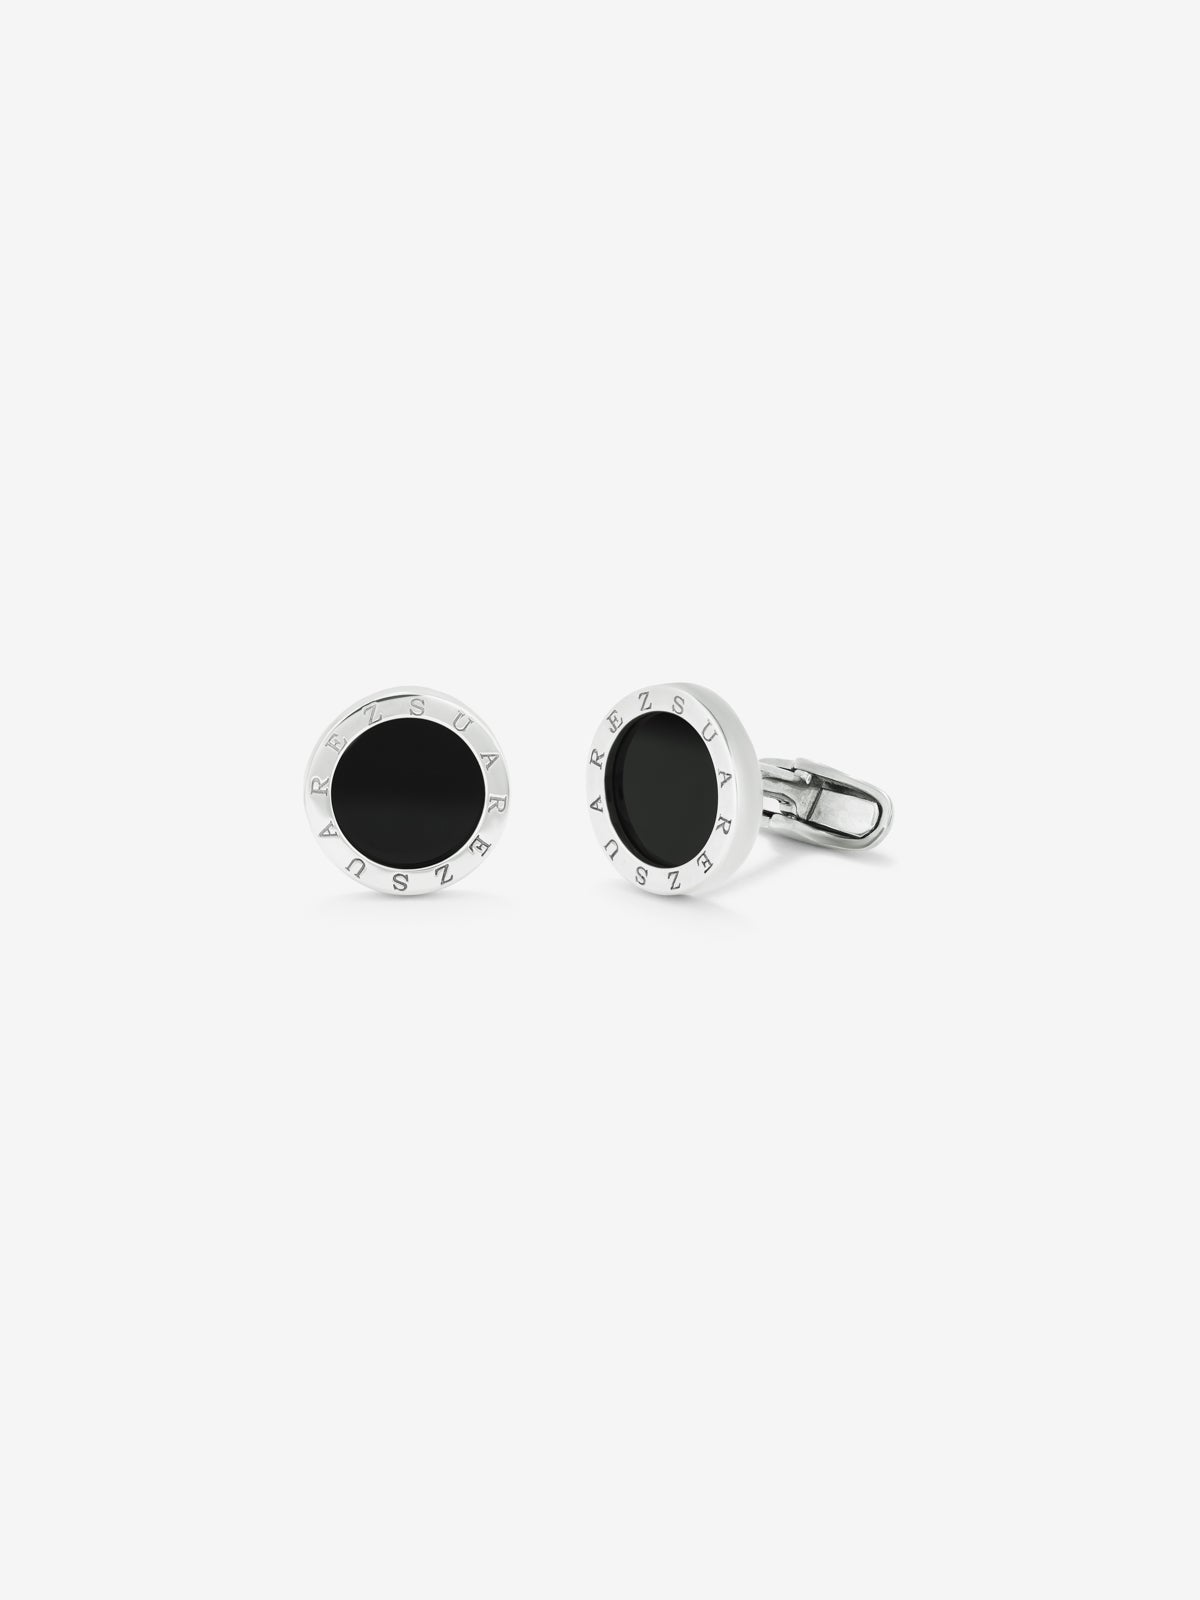 925 silver cufflinks with 2 onyx with a total of 5.44 cts and engraving